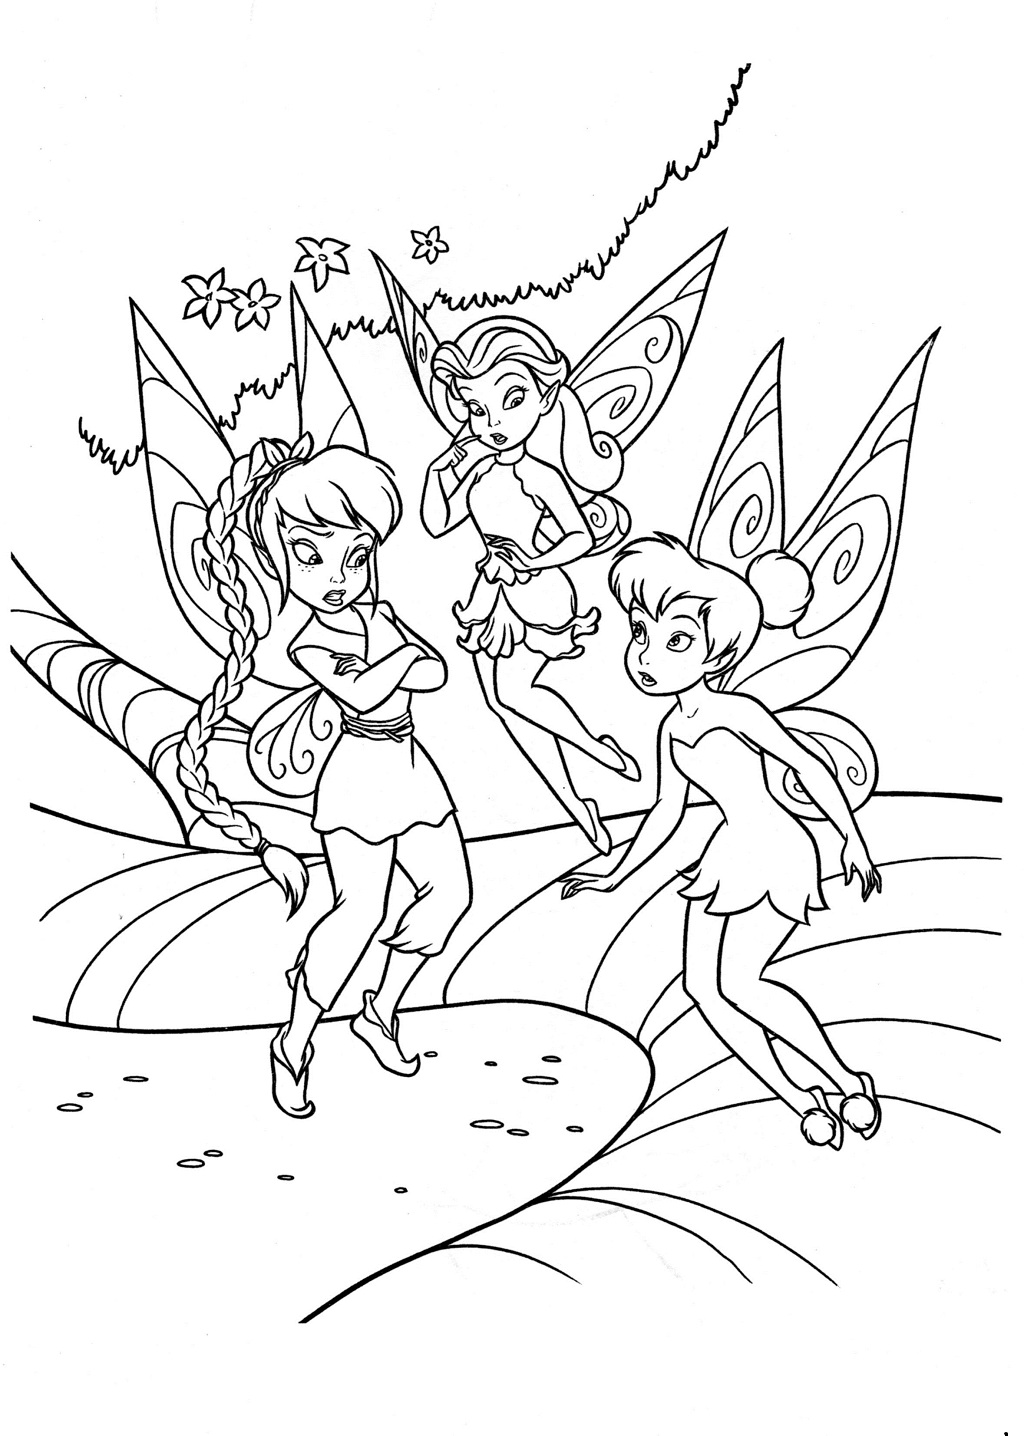 fairies-coloring-pages-3-coloring-kids-coloring-kids